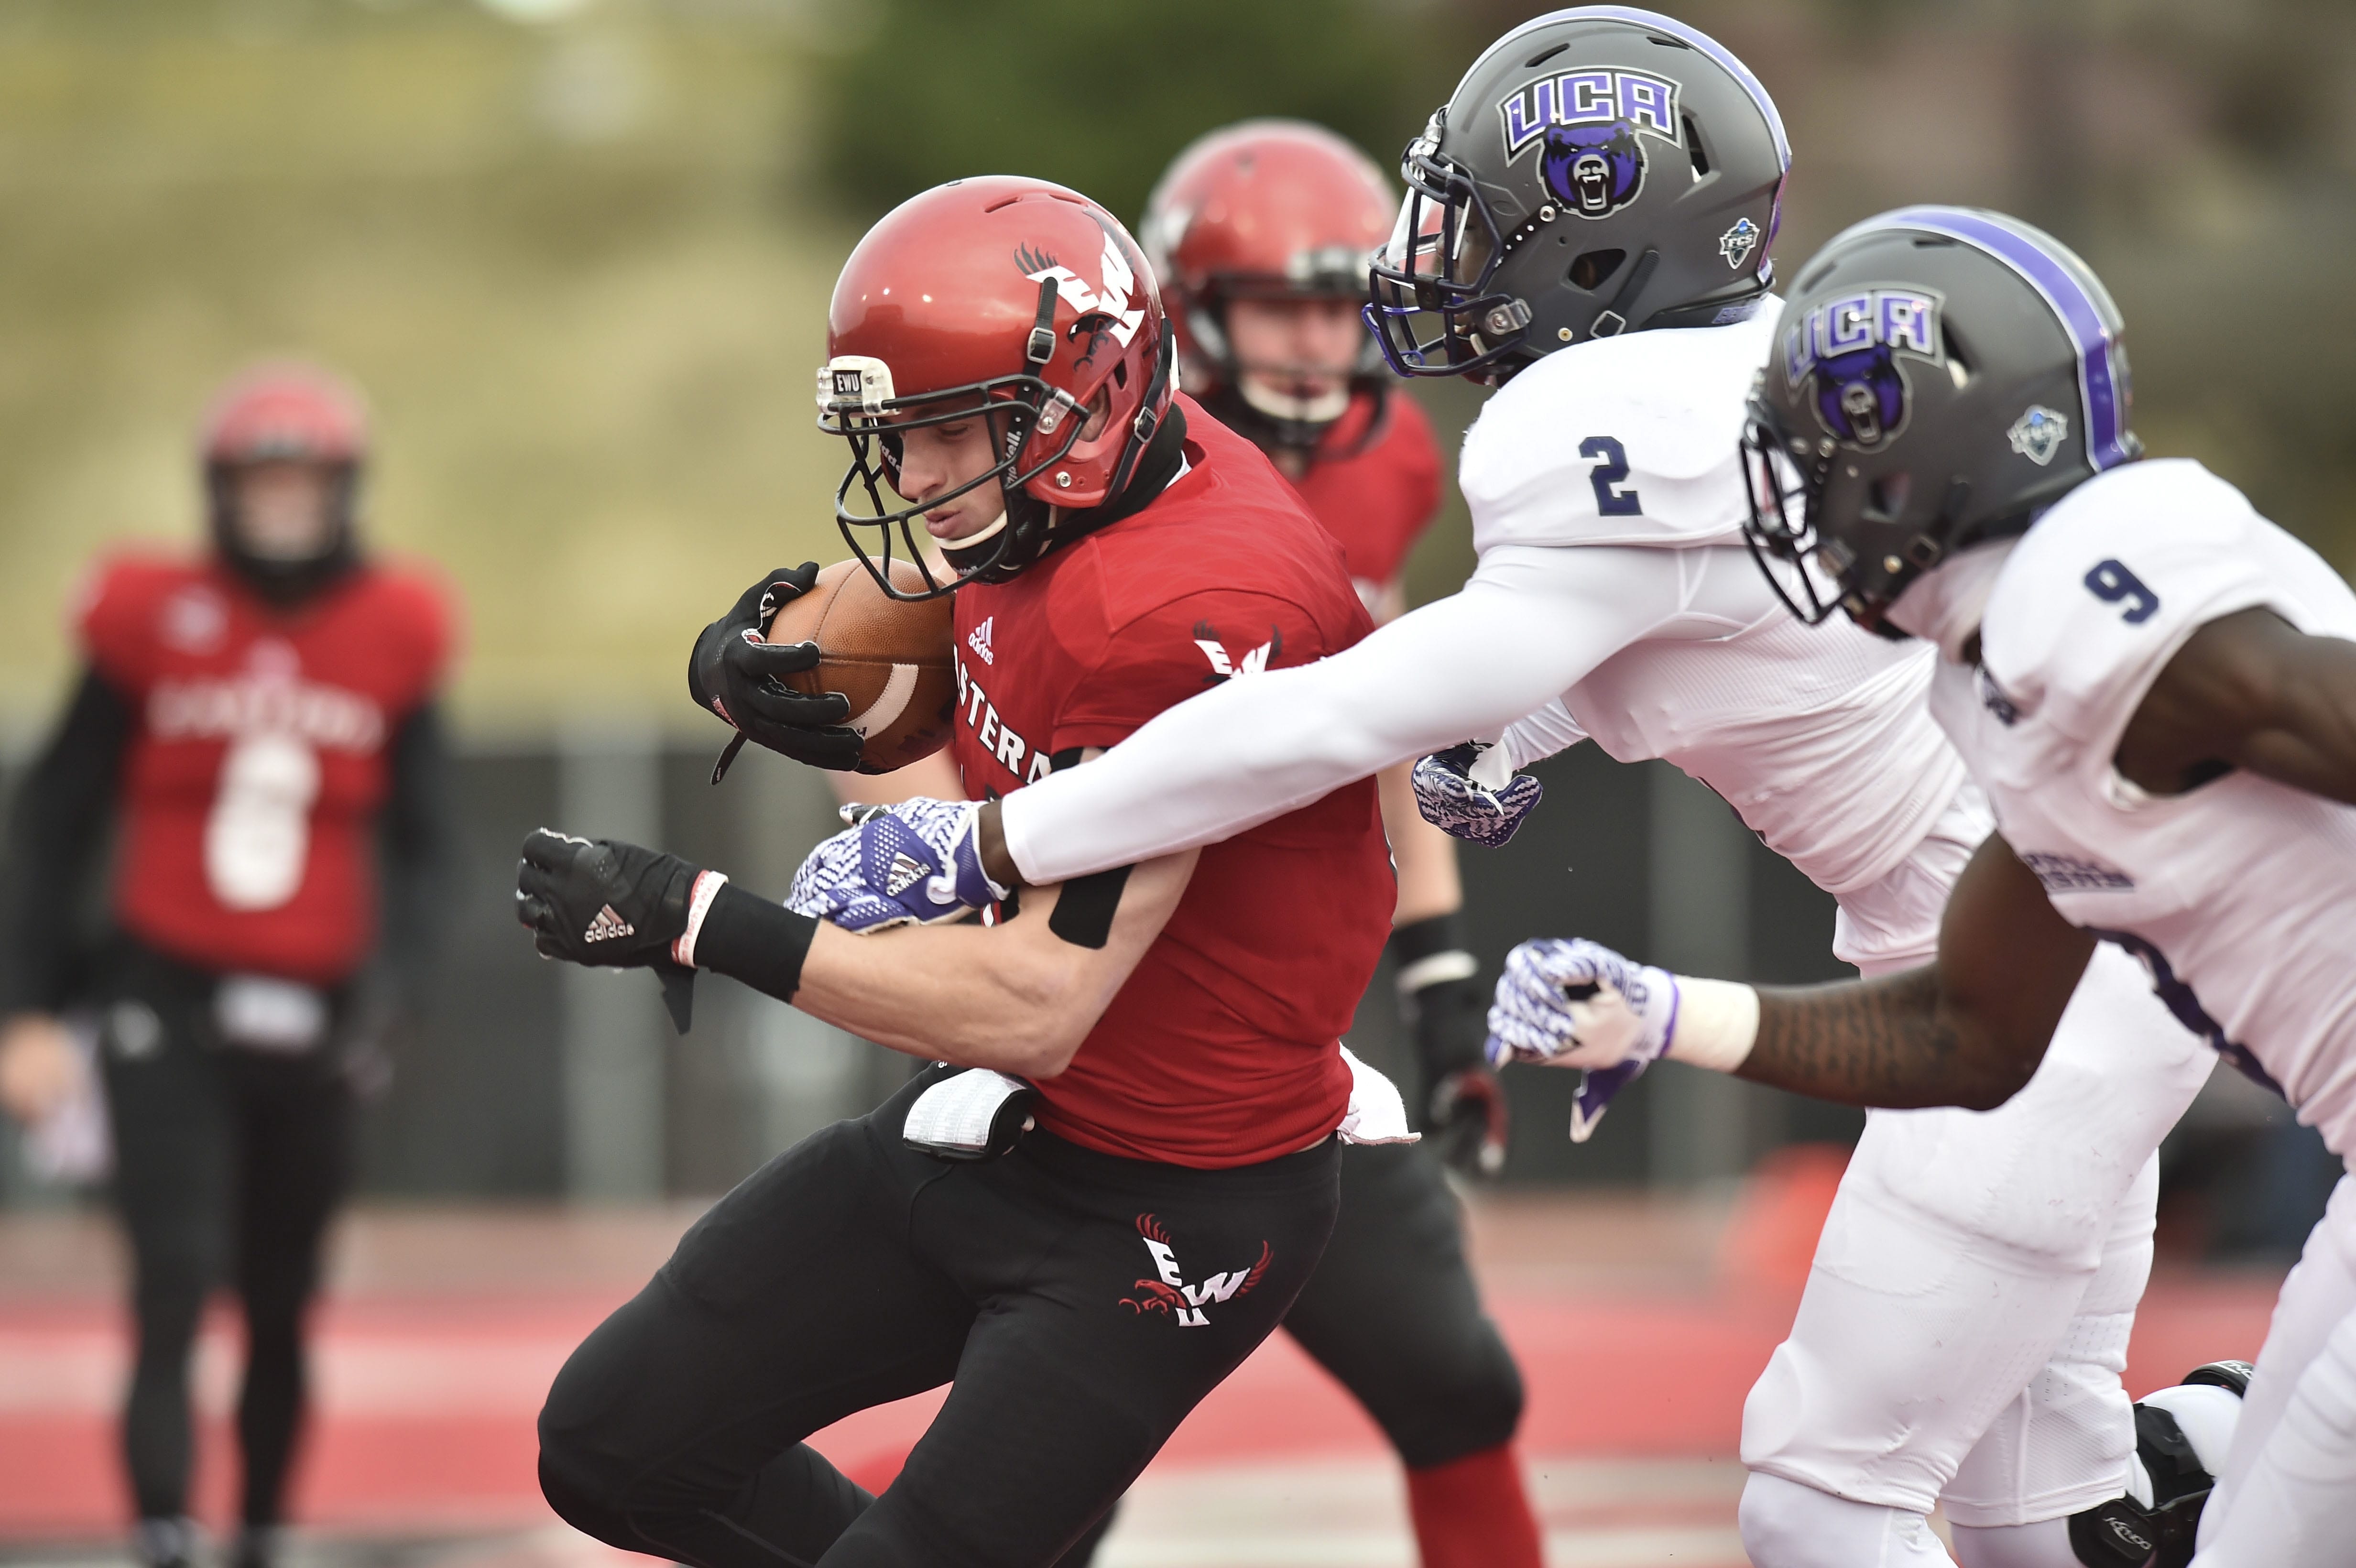 Eastern Washington wide receiver Cooper Kupp (10) hauls in a pass against Central Arkansas during the first half of an NCAA FCS college football playoff game Saturday, Dec 3, 2016, in Cheney, Wash.